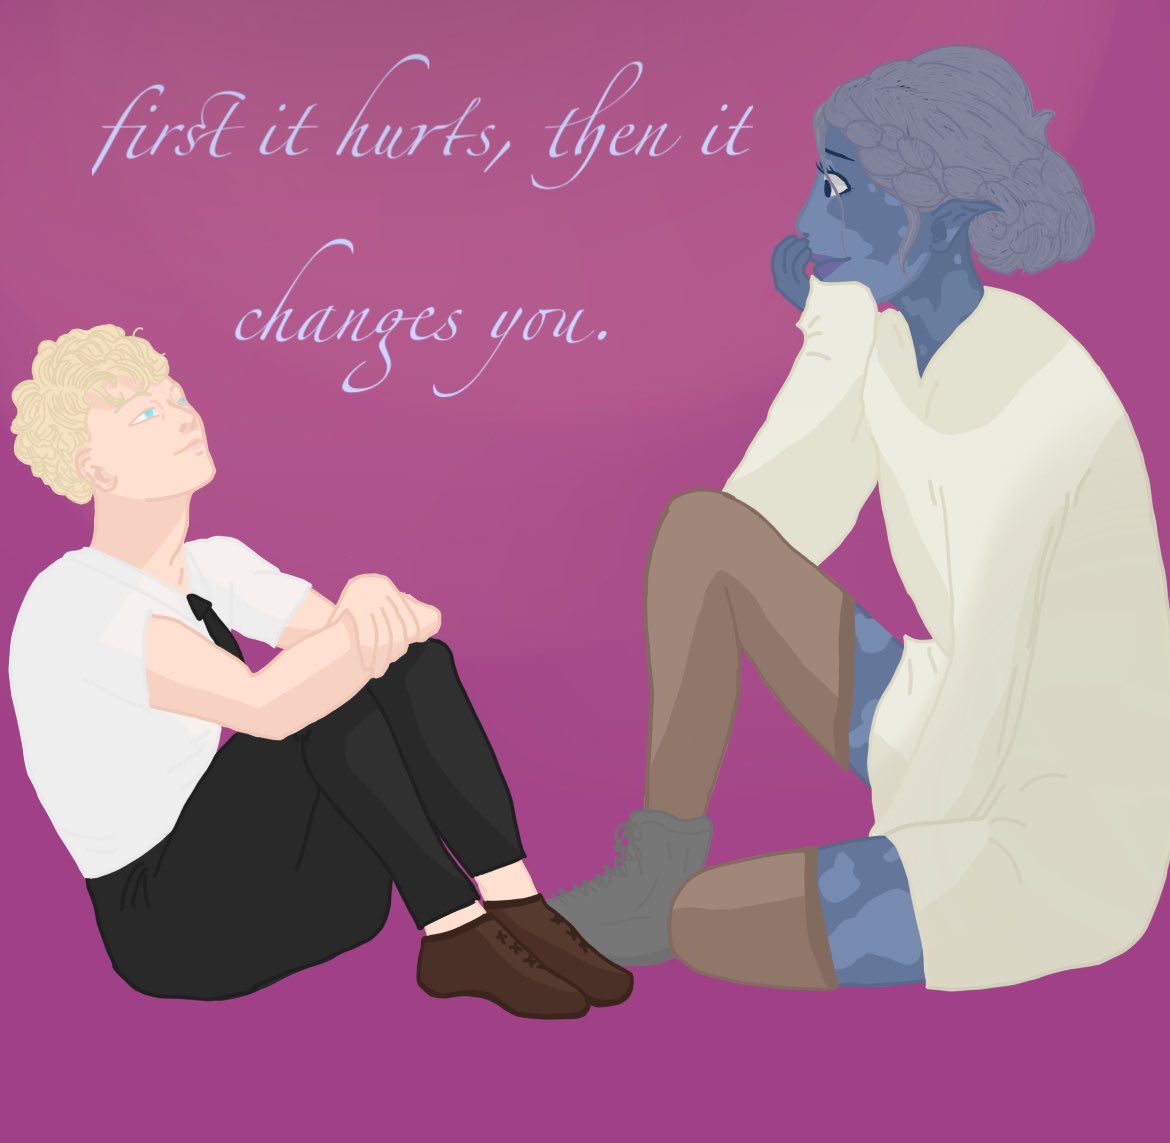 first it hurts, then it changes you. 

#lucyfrostblade #buddydawn #dimension20